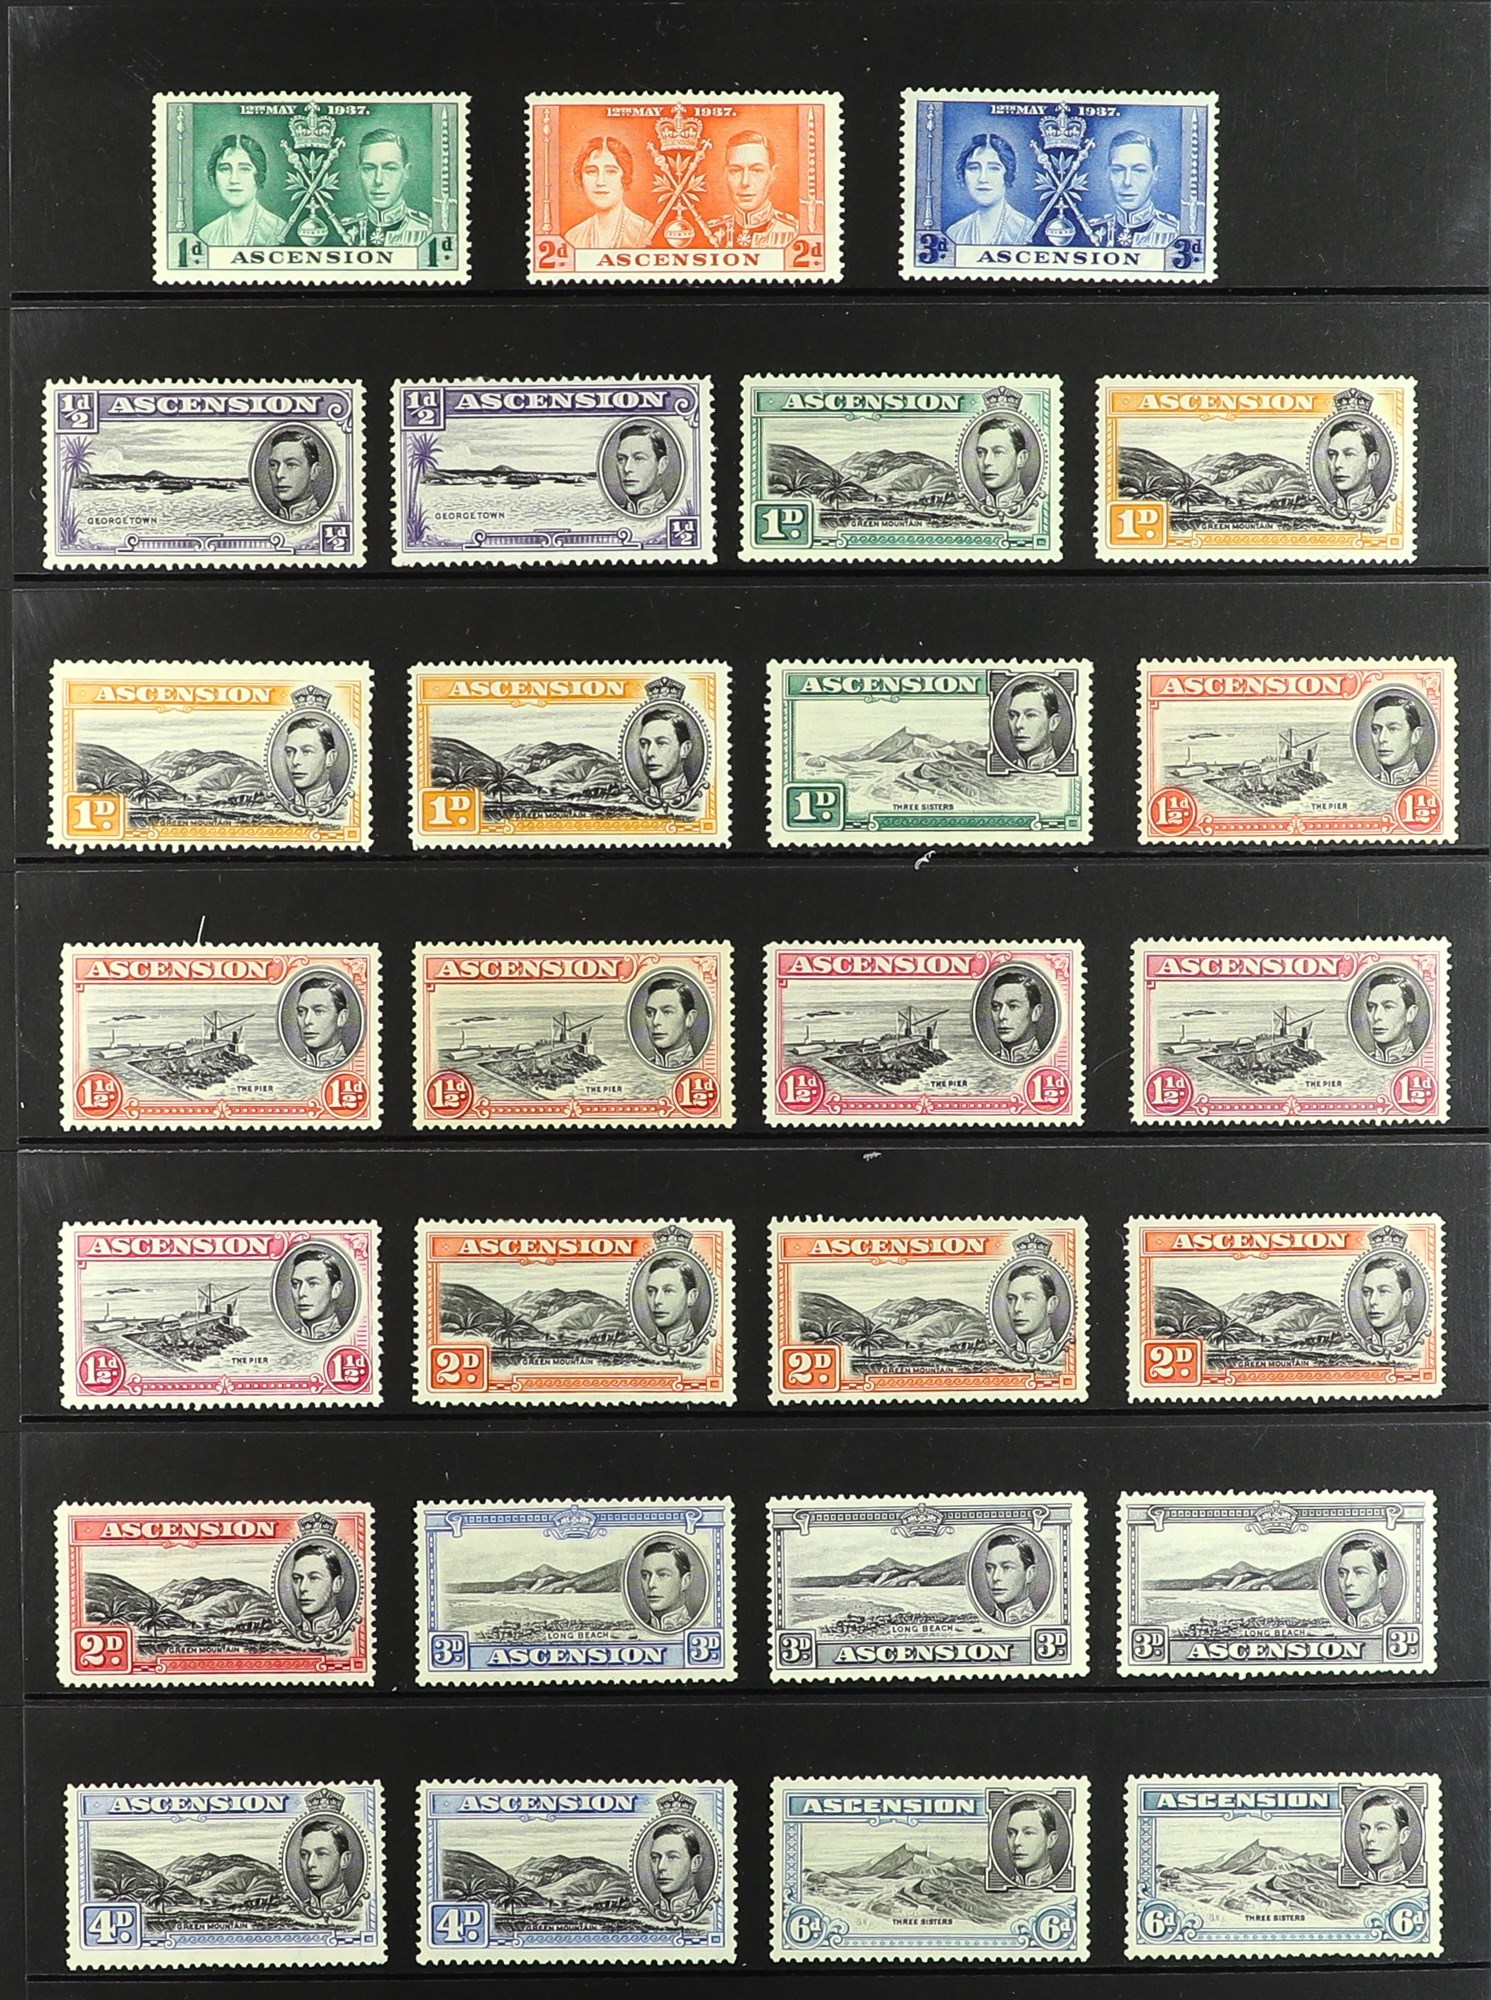 ASCENSION 1937 - 1949 MINT COLLECTION of over 40 stamps on protective pages, complete from 1937